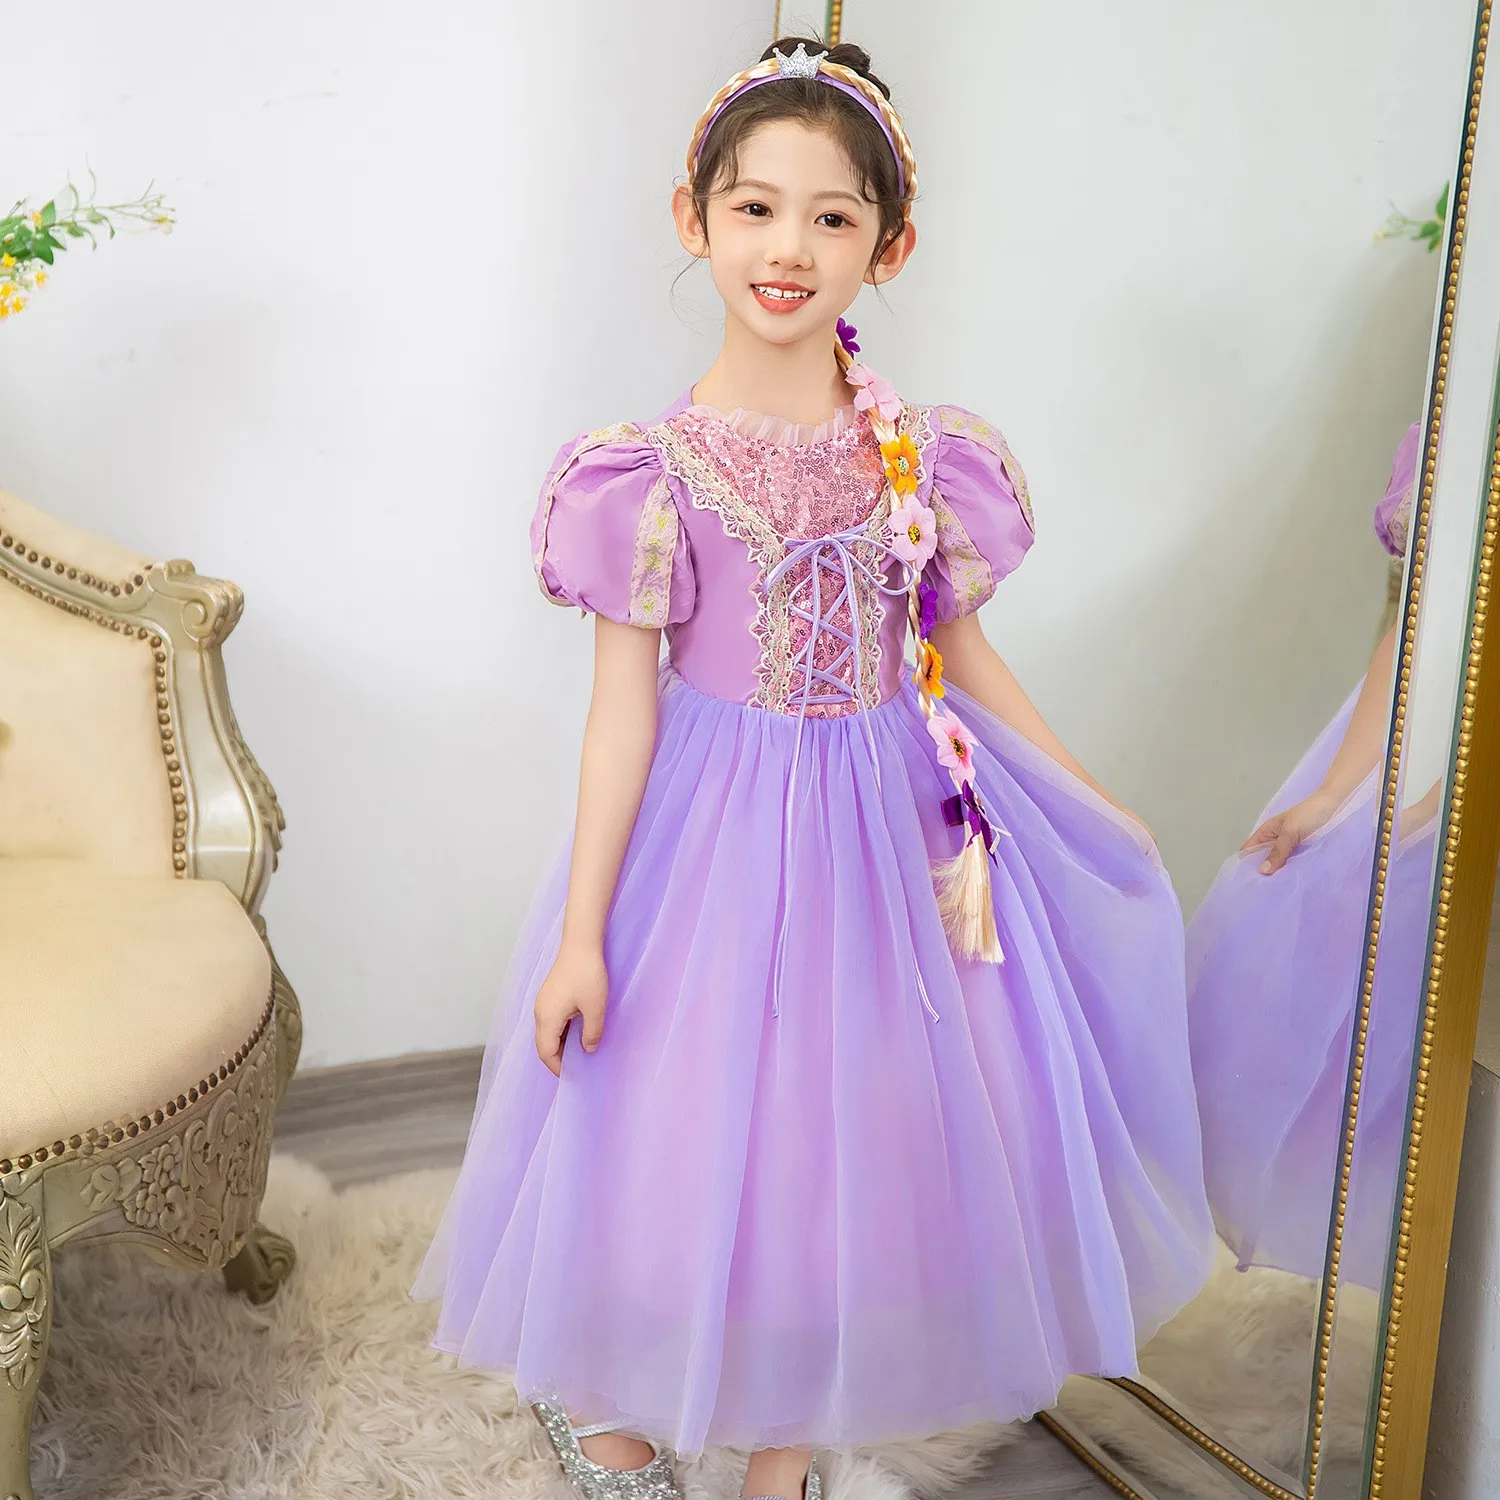 

Girls New Rapunzel Costume Kids Summer Tangled Fancy Cosplay Princess Dress Children Birthday Carnival Halloween Party Clothes